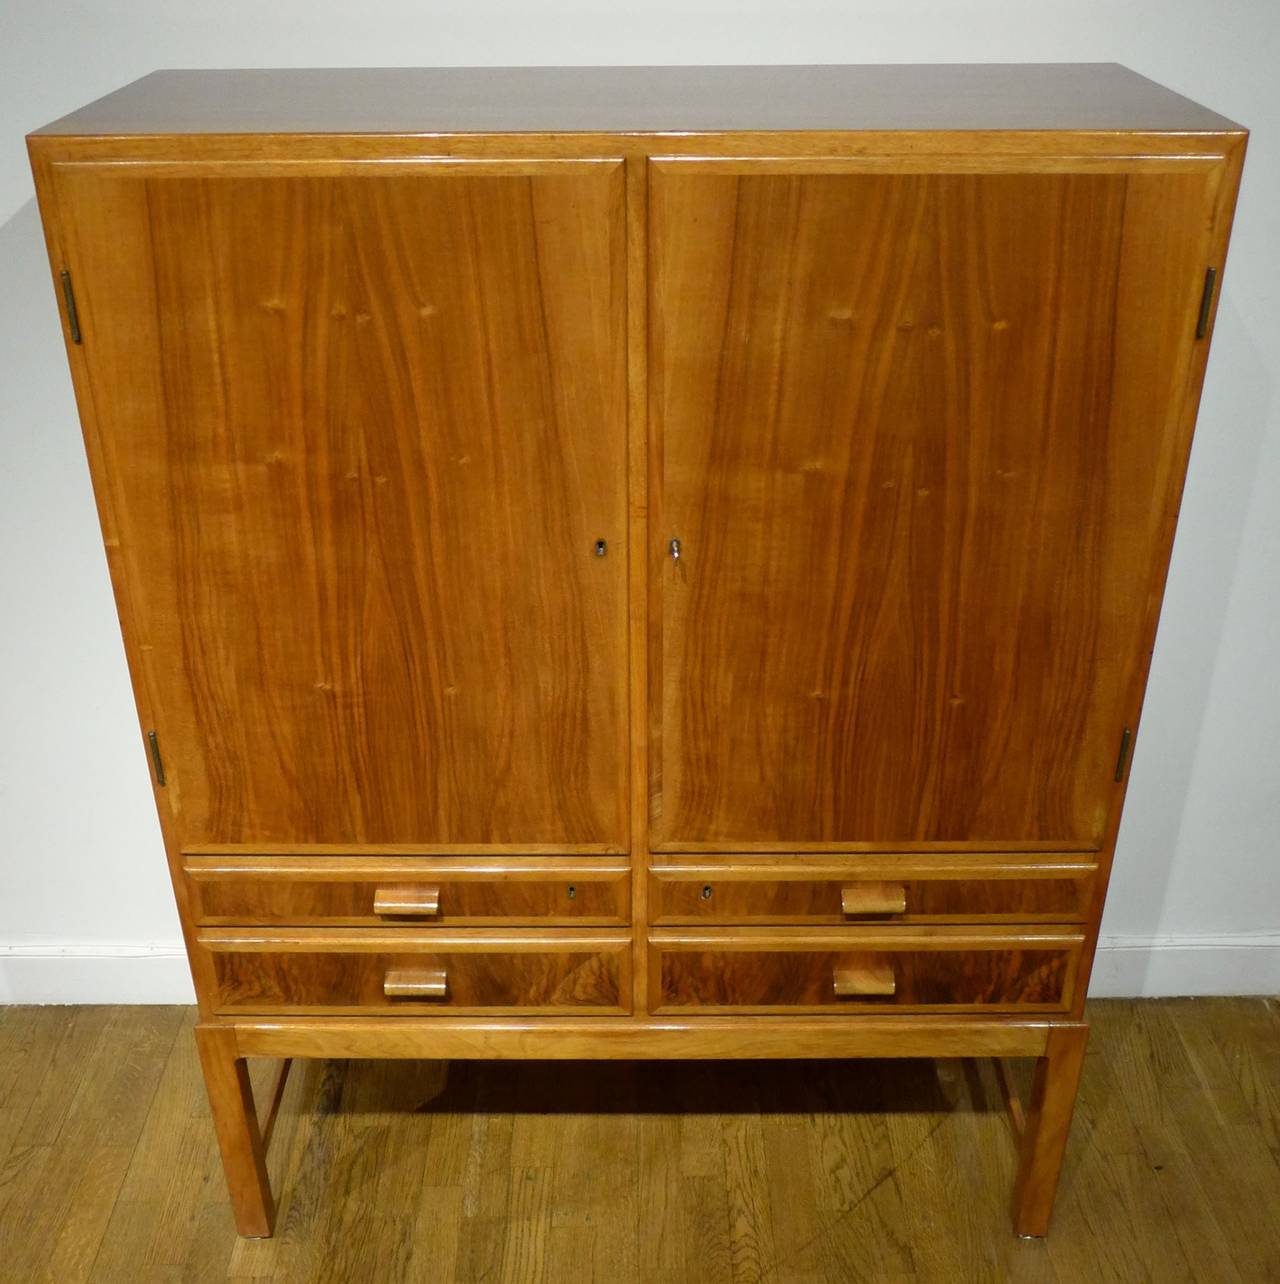 Service cabinet in figured mahogany with birch interiors and original brass hinges and escutcheons. The two doors each conceal two adjustable shelves, with four drawers underneath. A well-made and nicely proportioned piece by Danish master